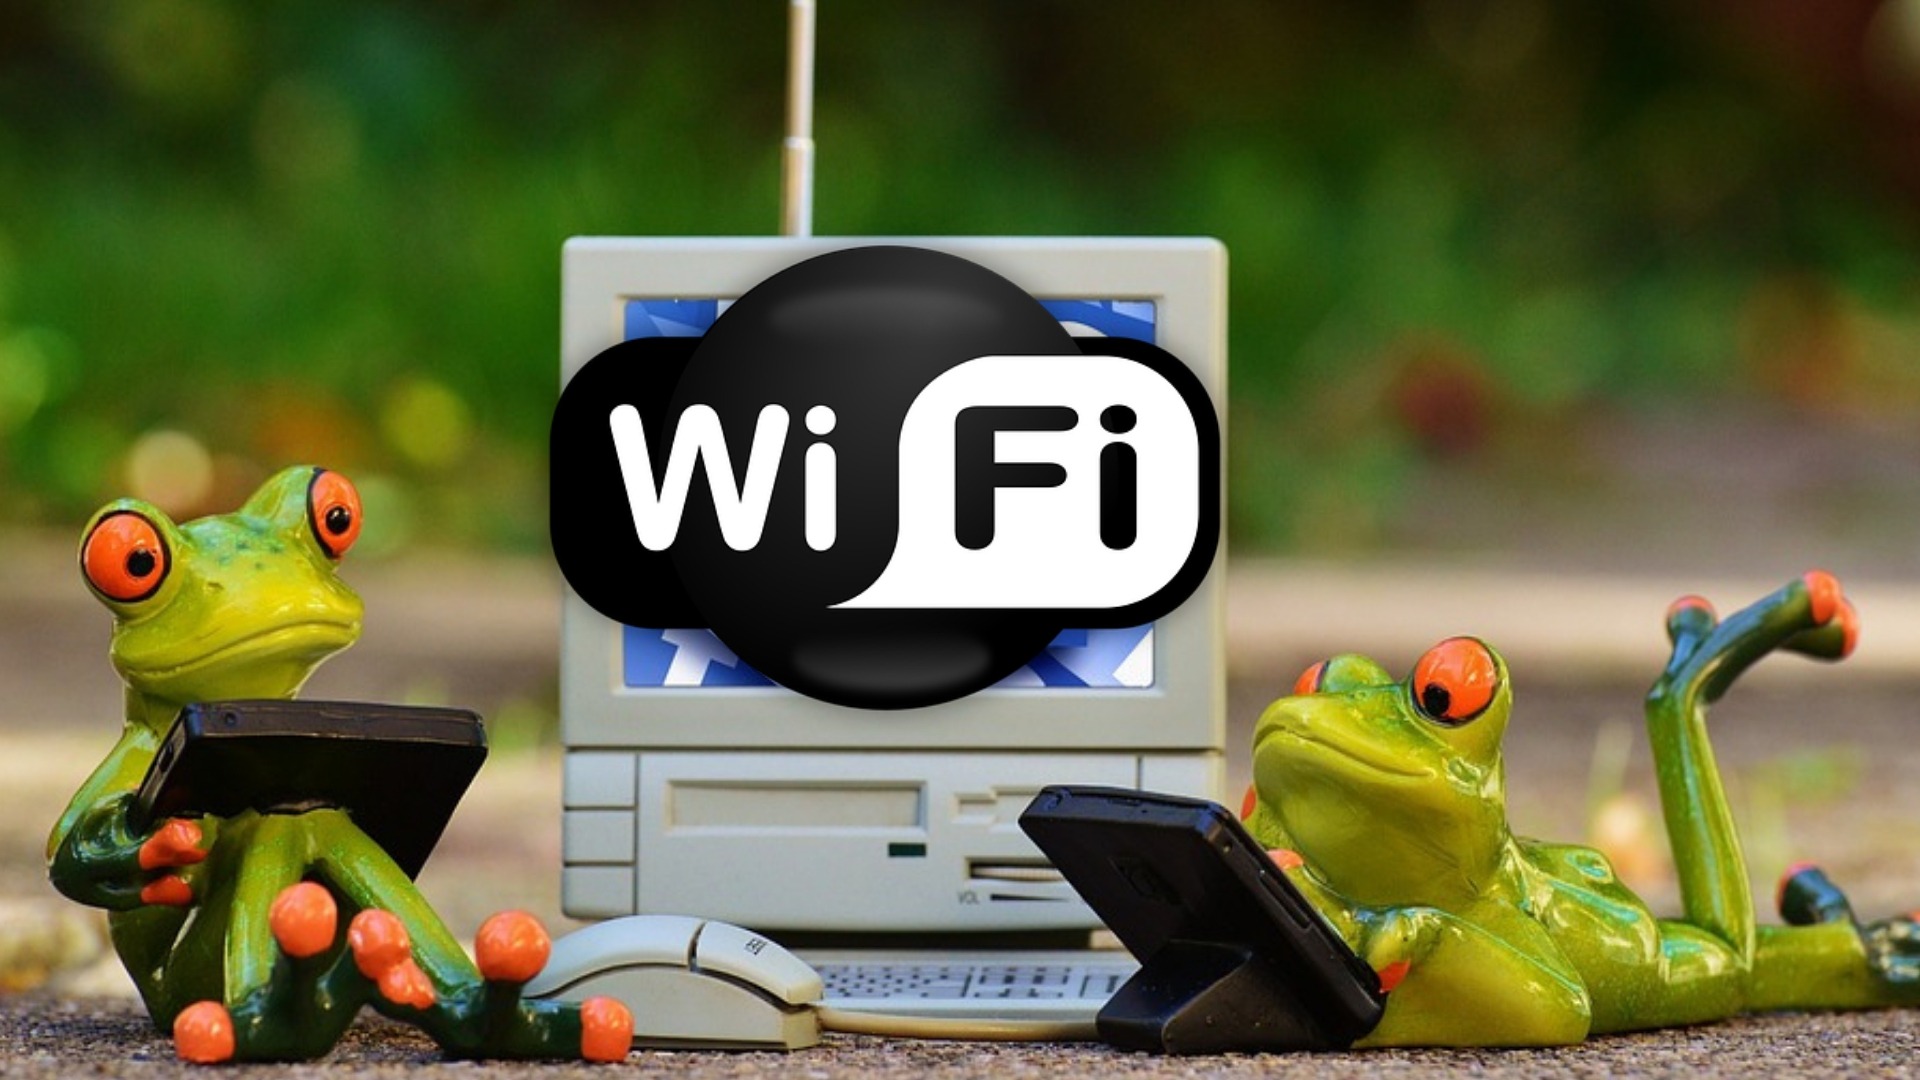 154 Funny, Adult & Cool Wifi Names: The Complete List